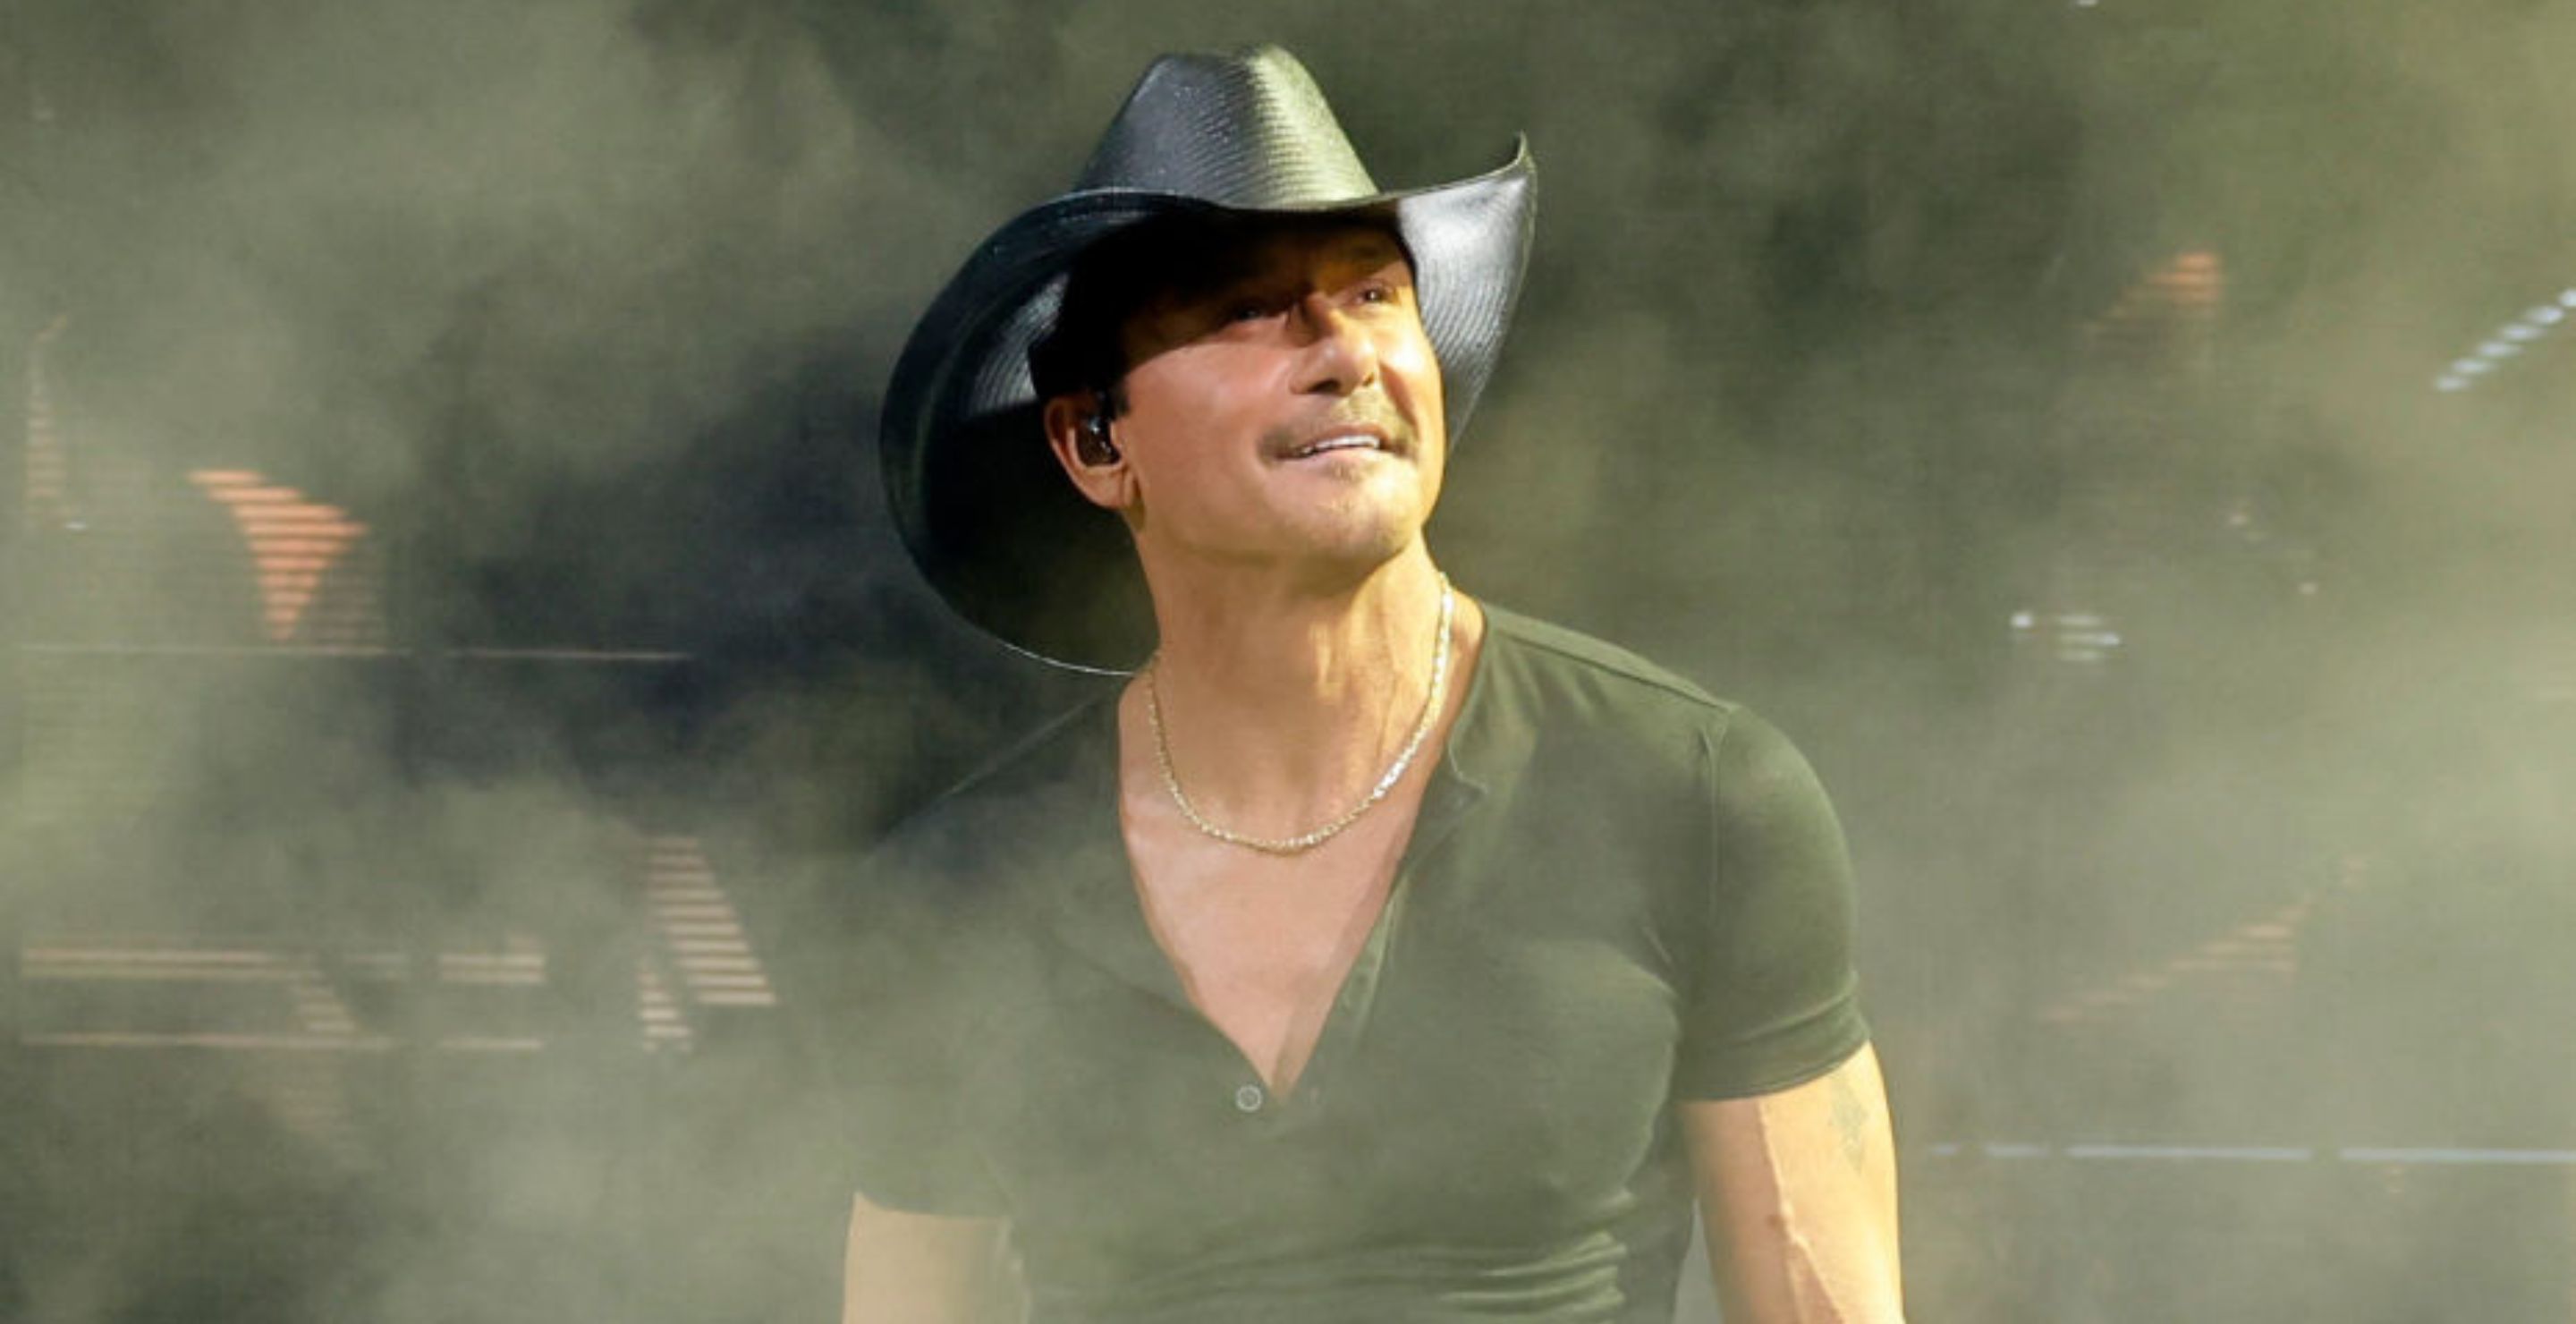 Tim McGraw Just Tossed His Hat In Ring For Most Adorable Baby Gender Reveal At Concert